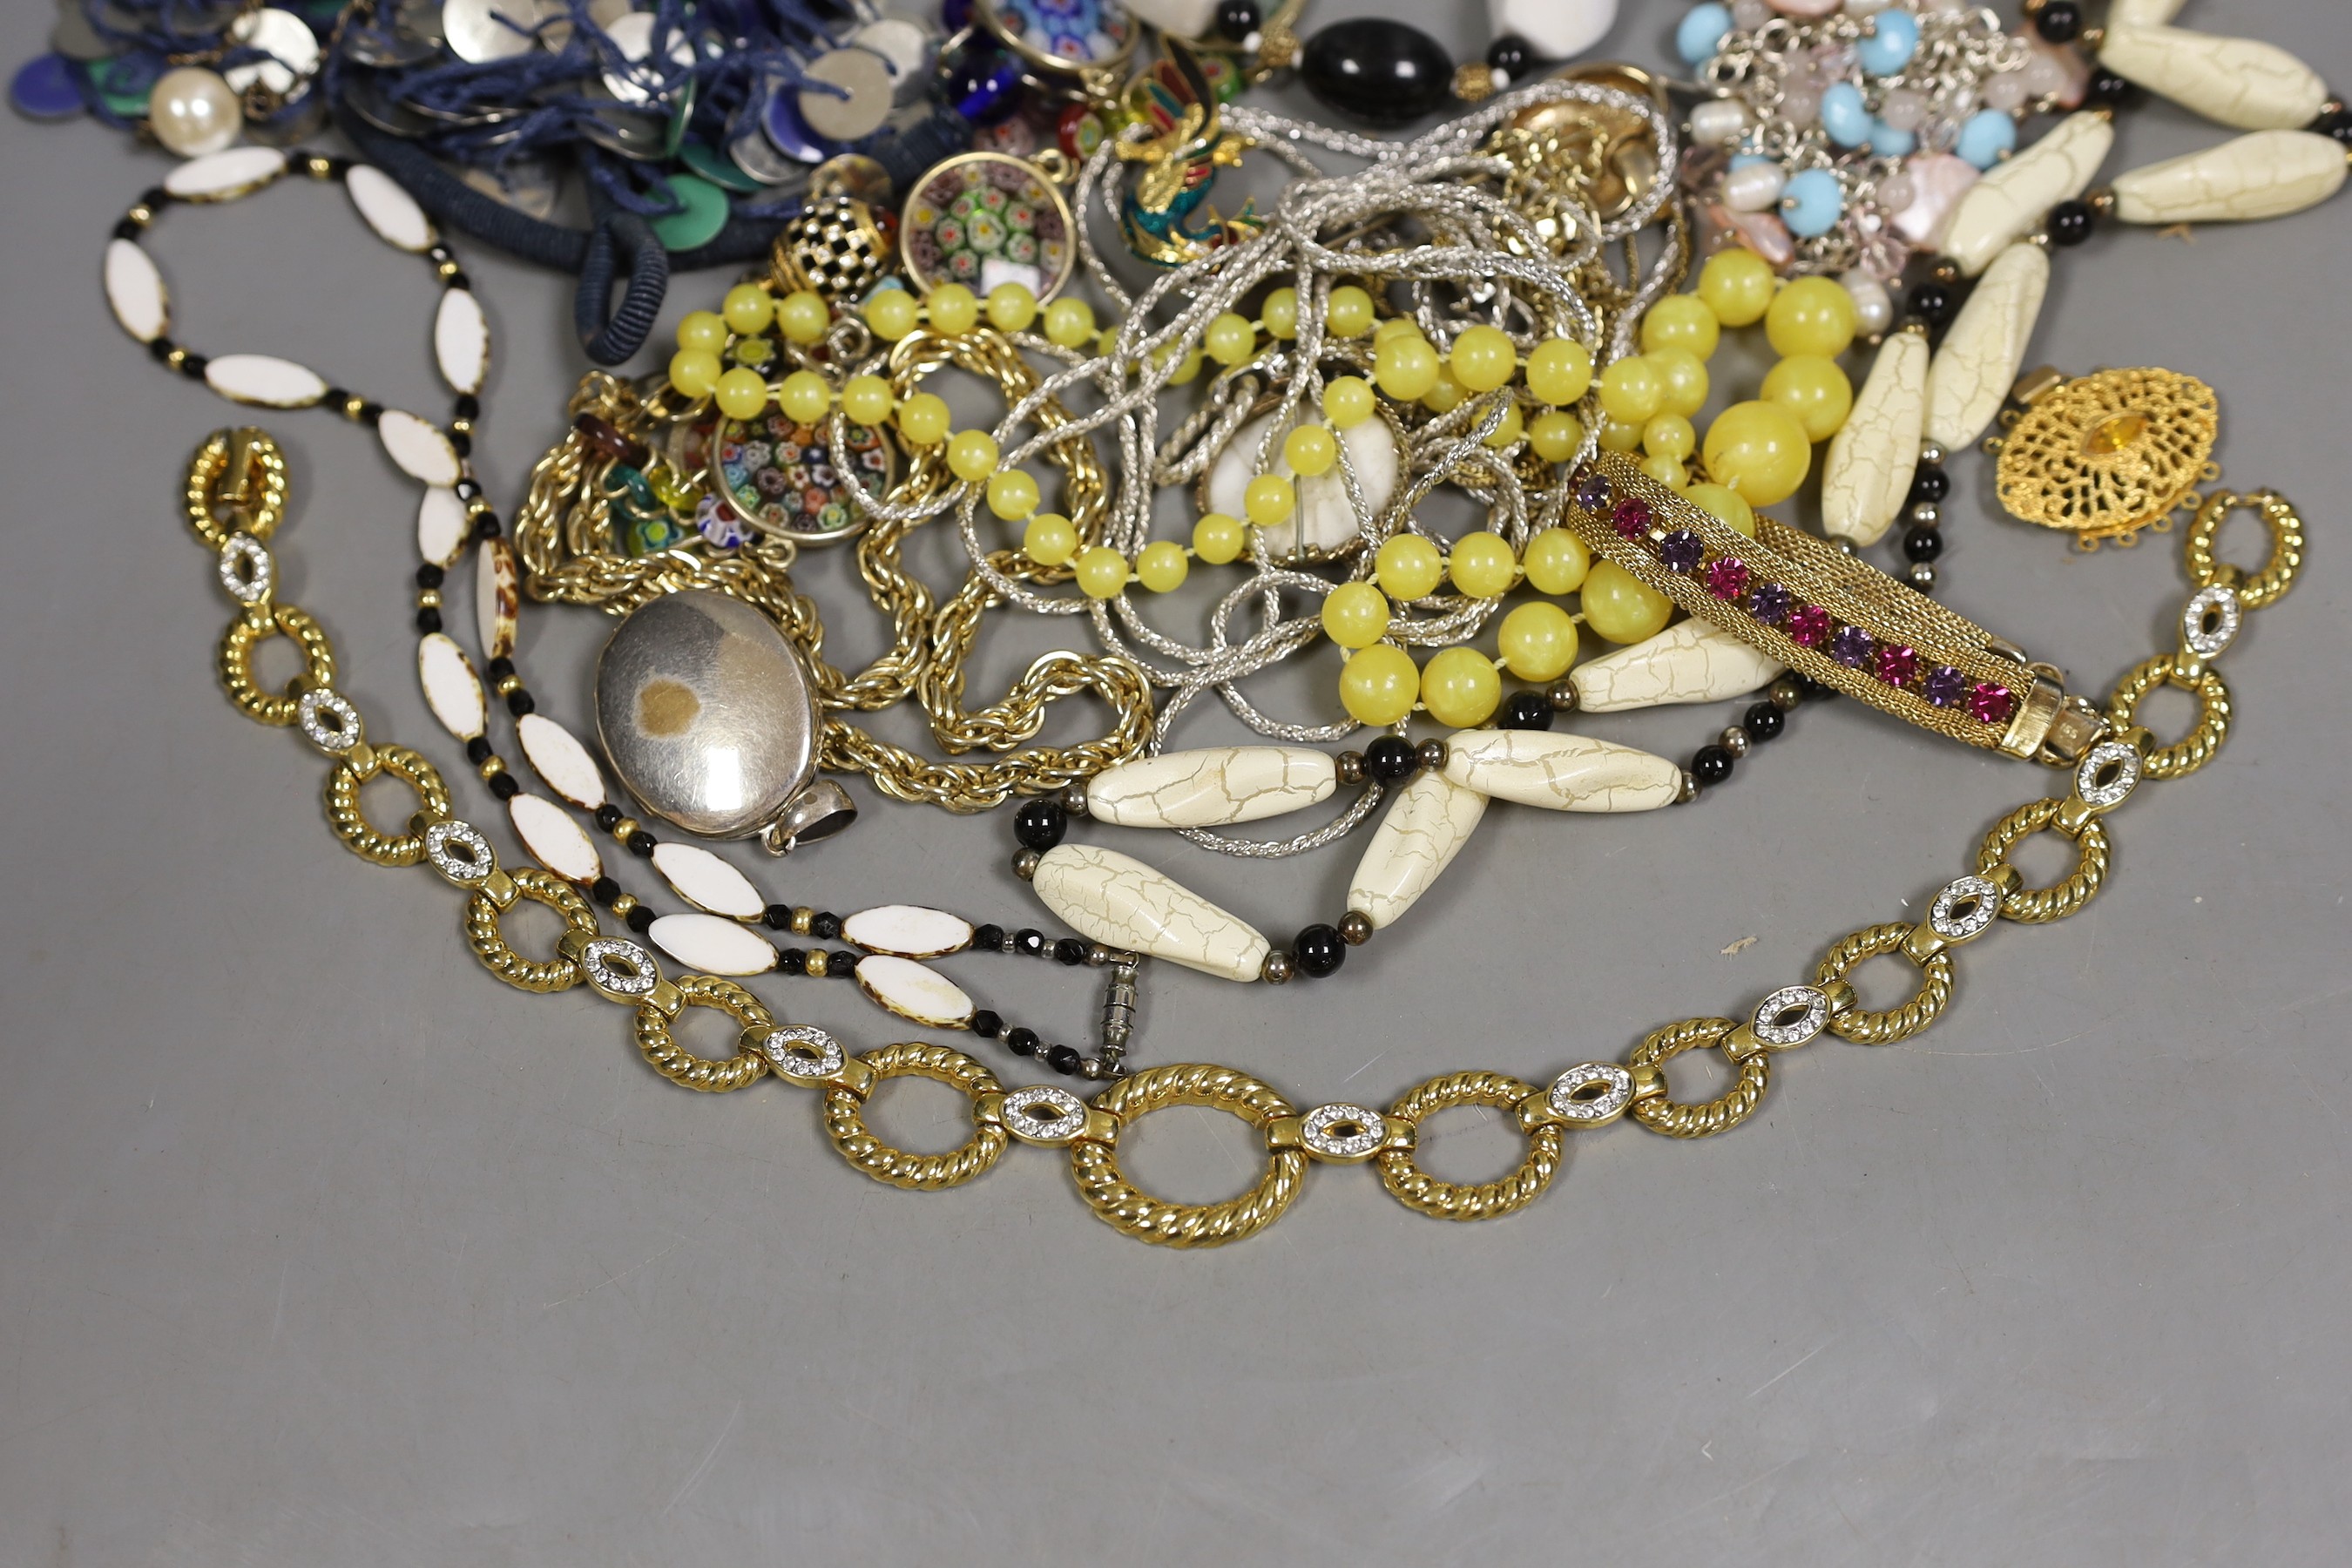 A quantity of assorted costume jewellery including necklaces, bracelets etc. - Image 5 of 5